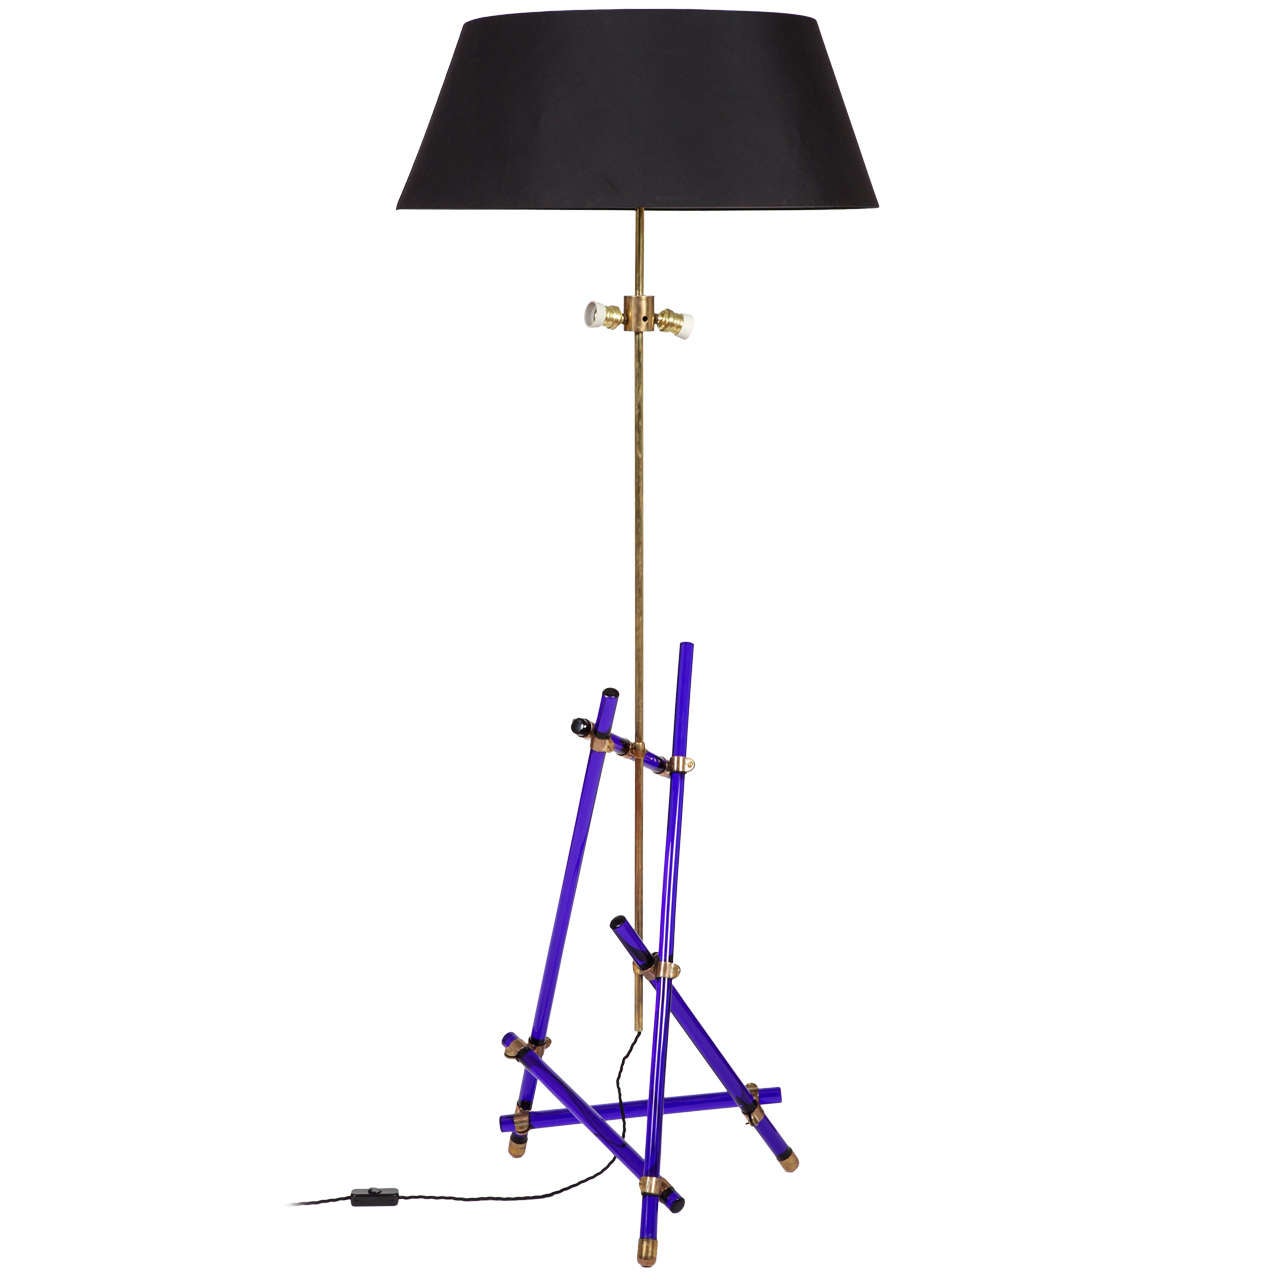 Big Colored Floor Lamp in the style of Fontana Arte